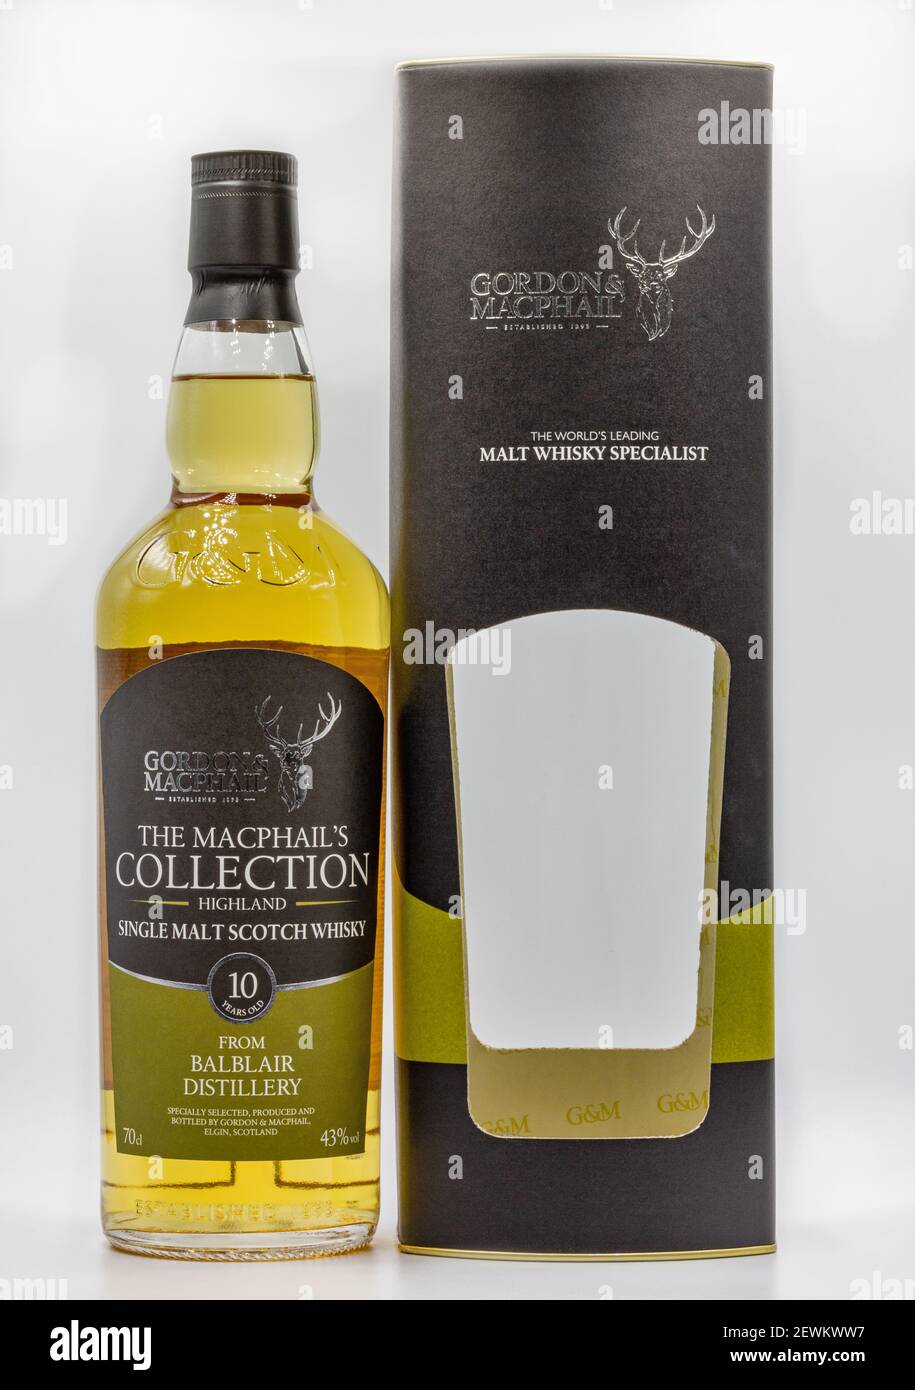 KYIV, UKRAINE - DECEMBER 17, 2020: Studio shoot of The Macphails Collection Highland Single Malt Scotch 10 years old whisky bottle and box closeup aga Stock Photo